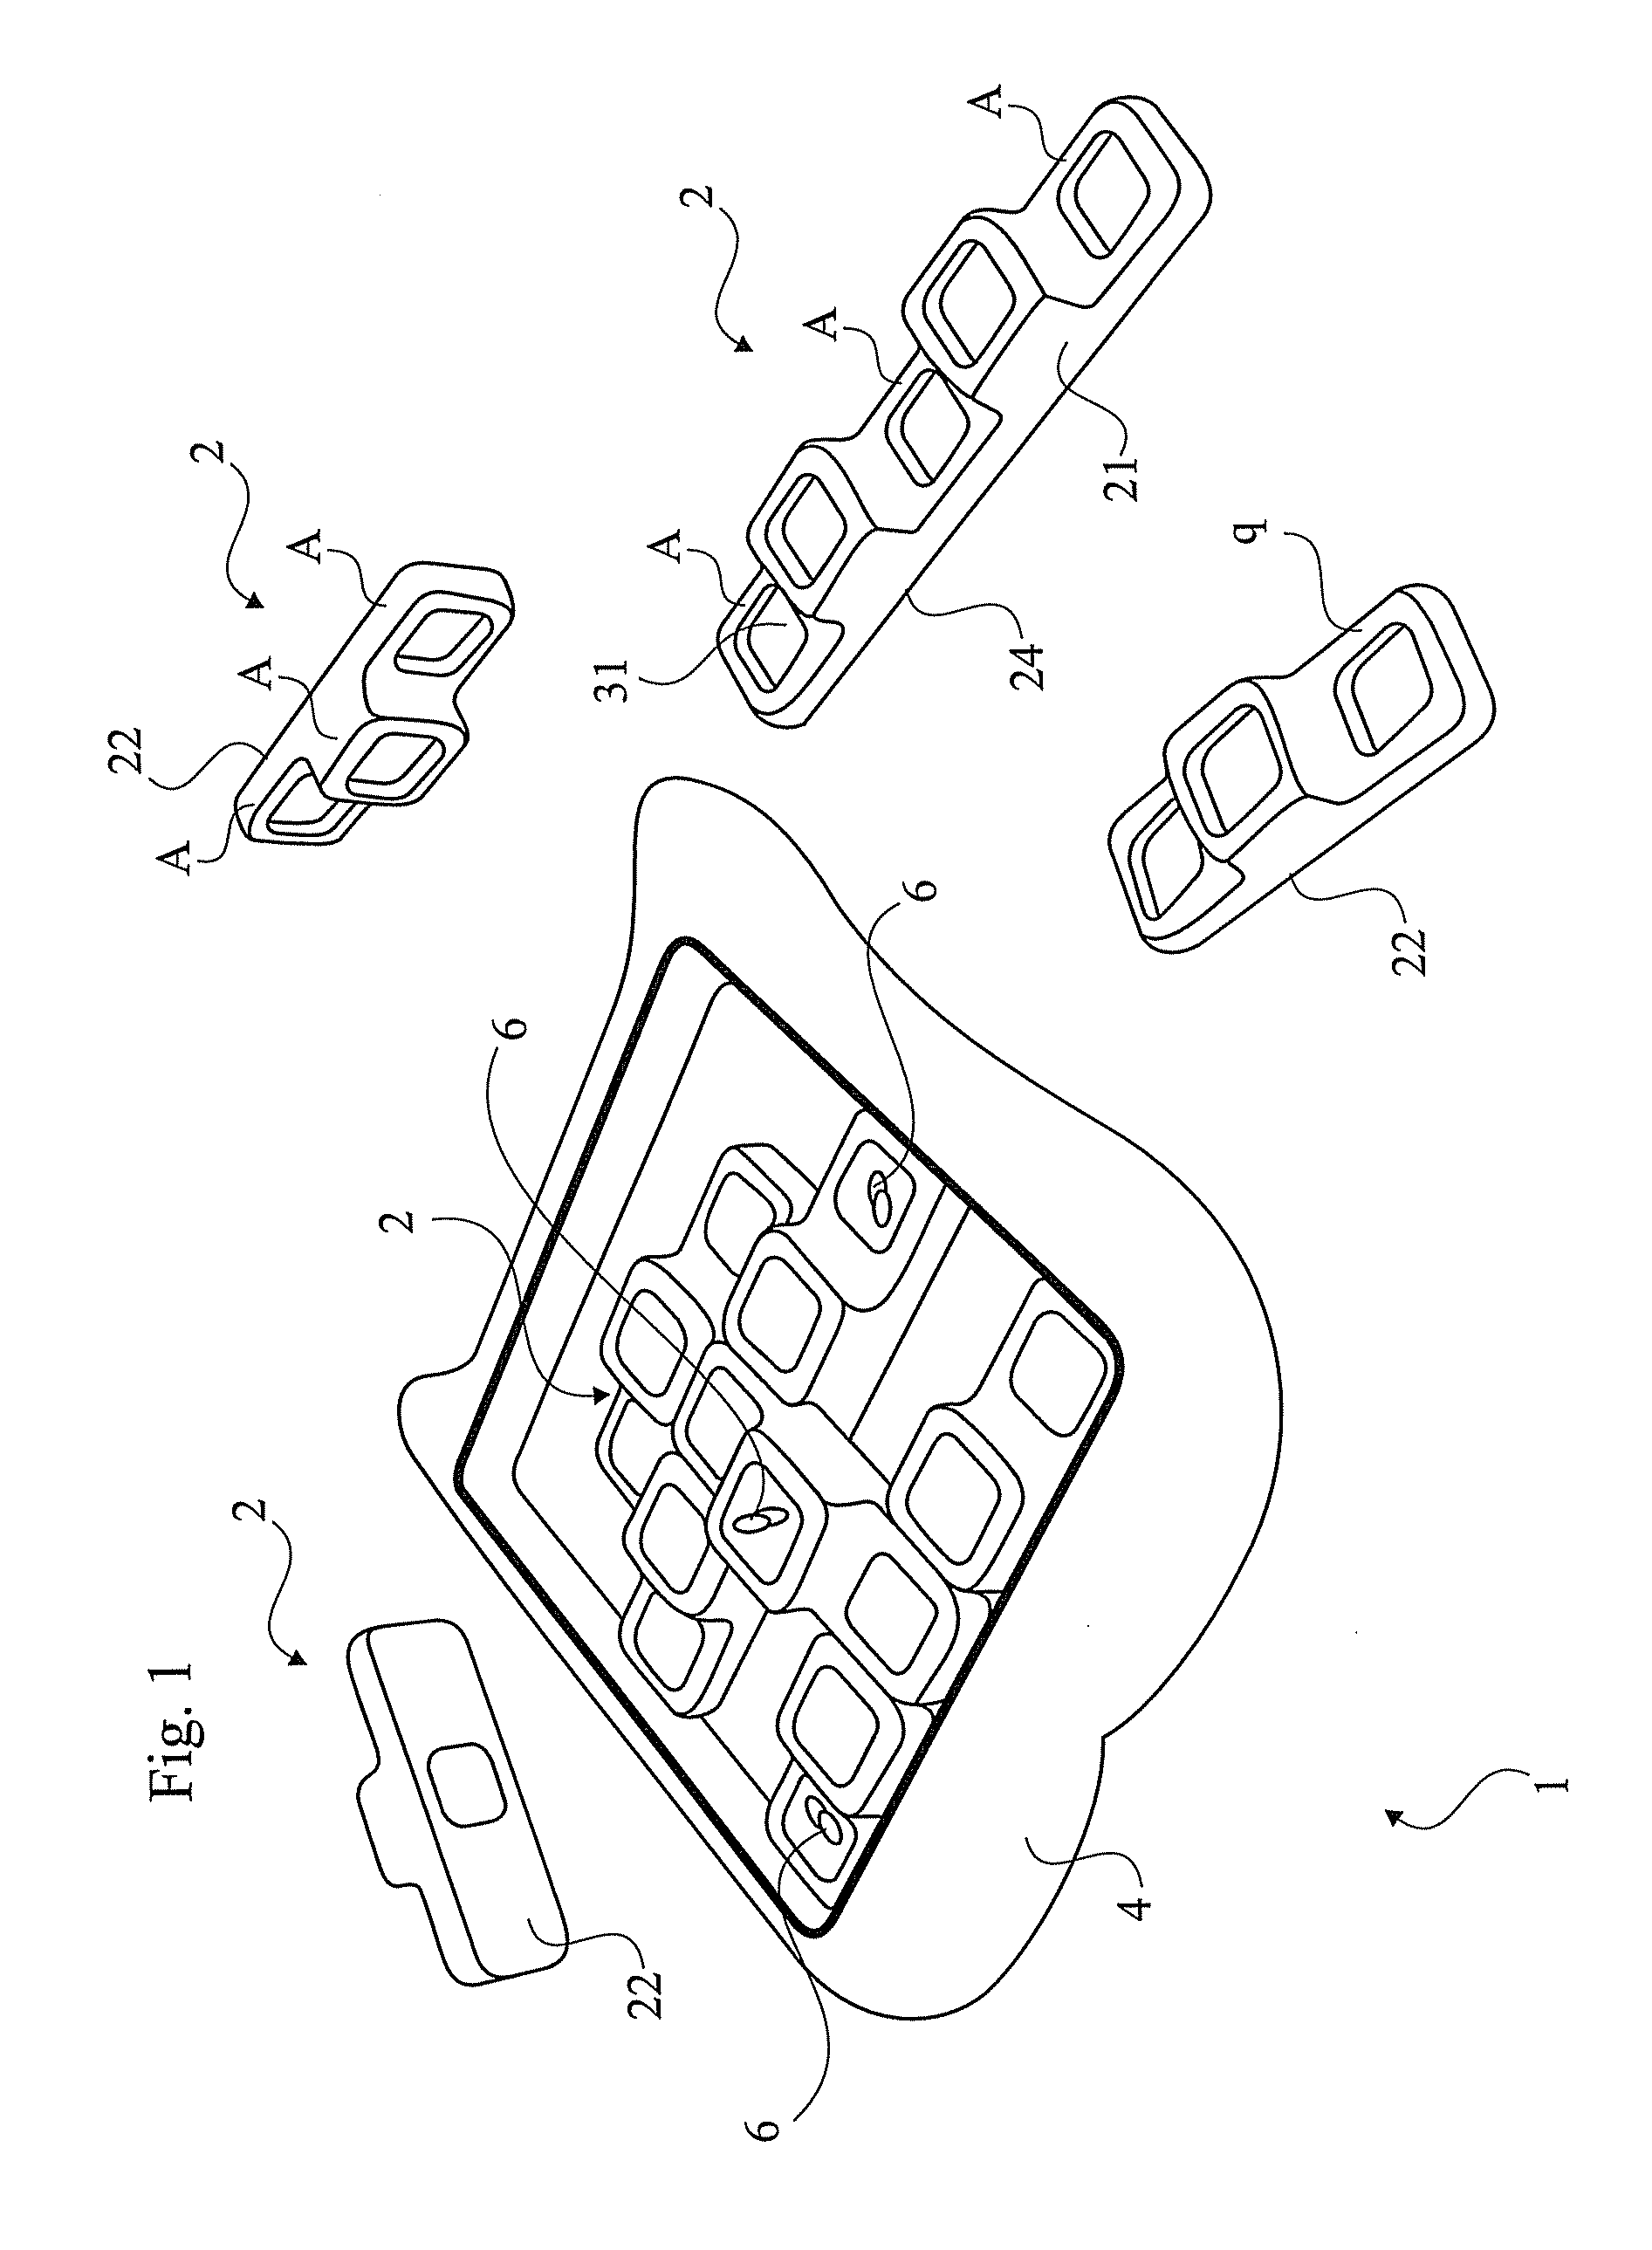 Pet game assembly and method for training or otherwise stimulating a pet